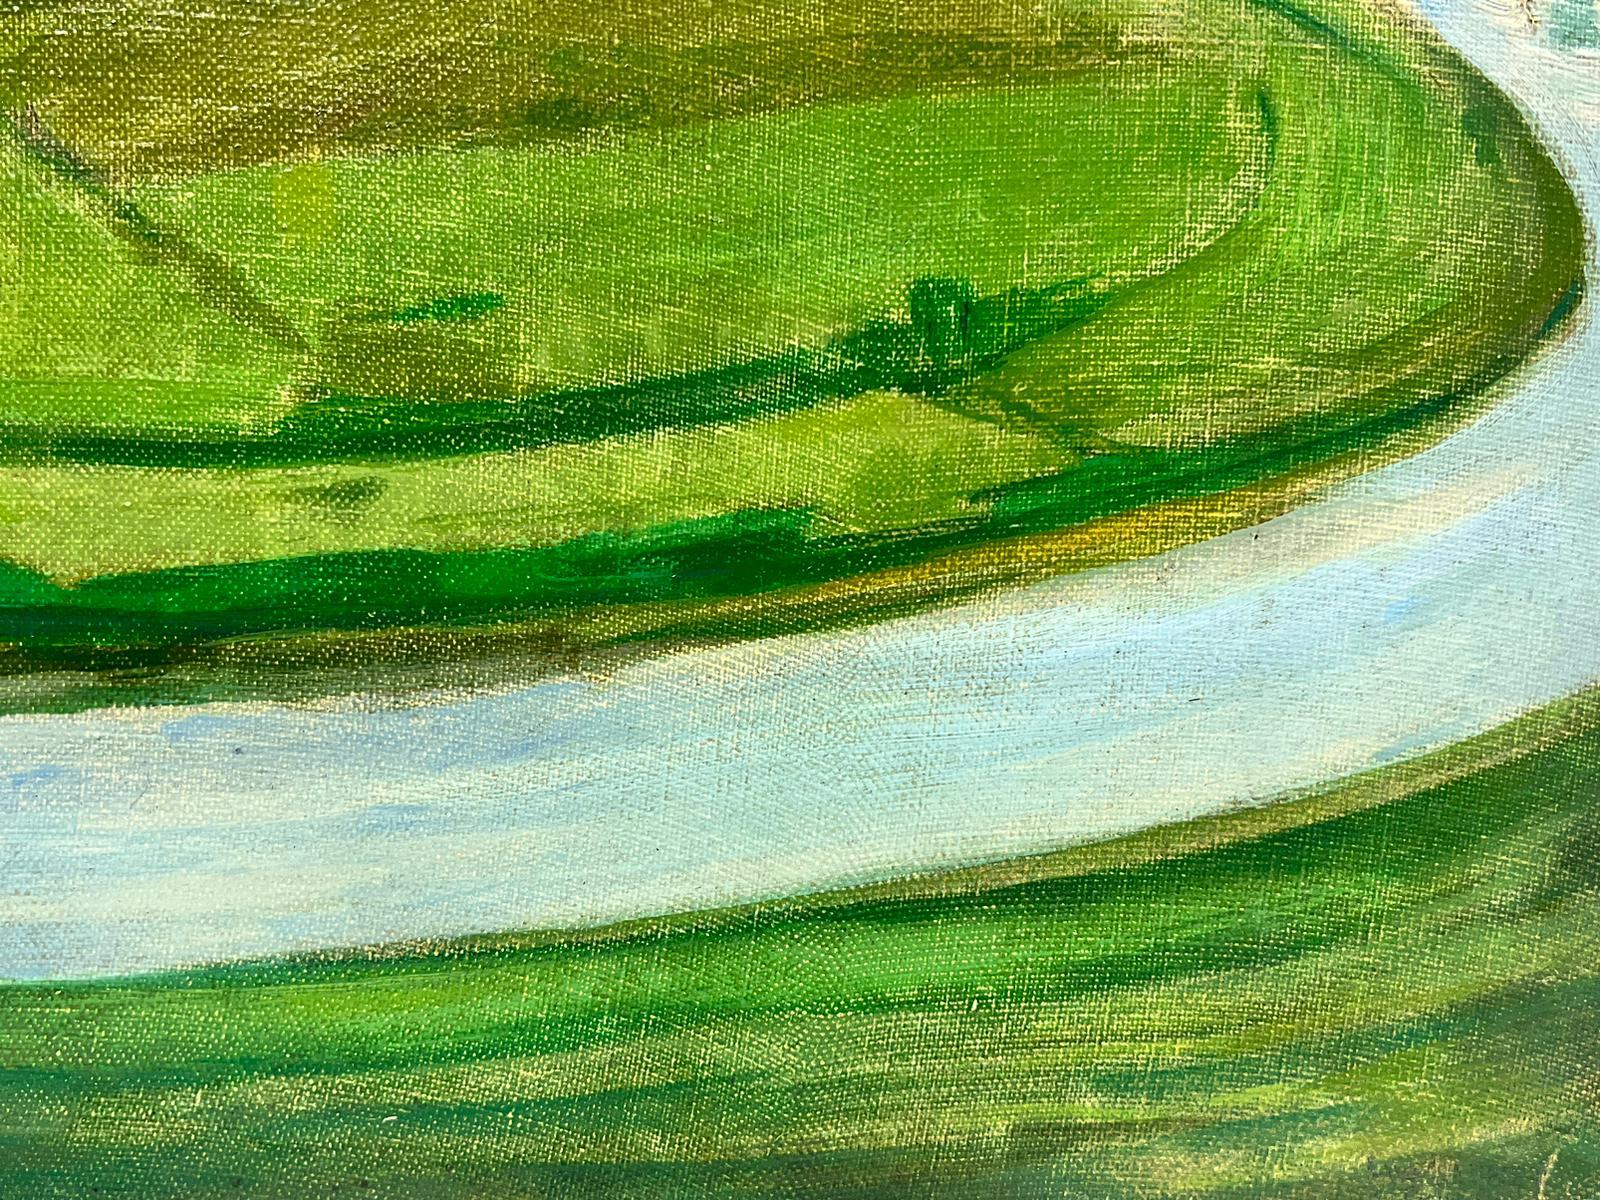 Mid Century French Post Impressionist Oil on Canvas Green Fields with River - Post-Impressionist Painting by French School